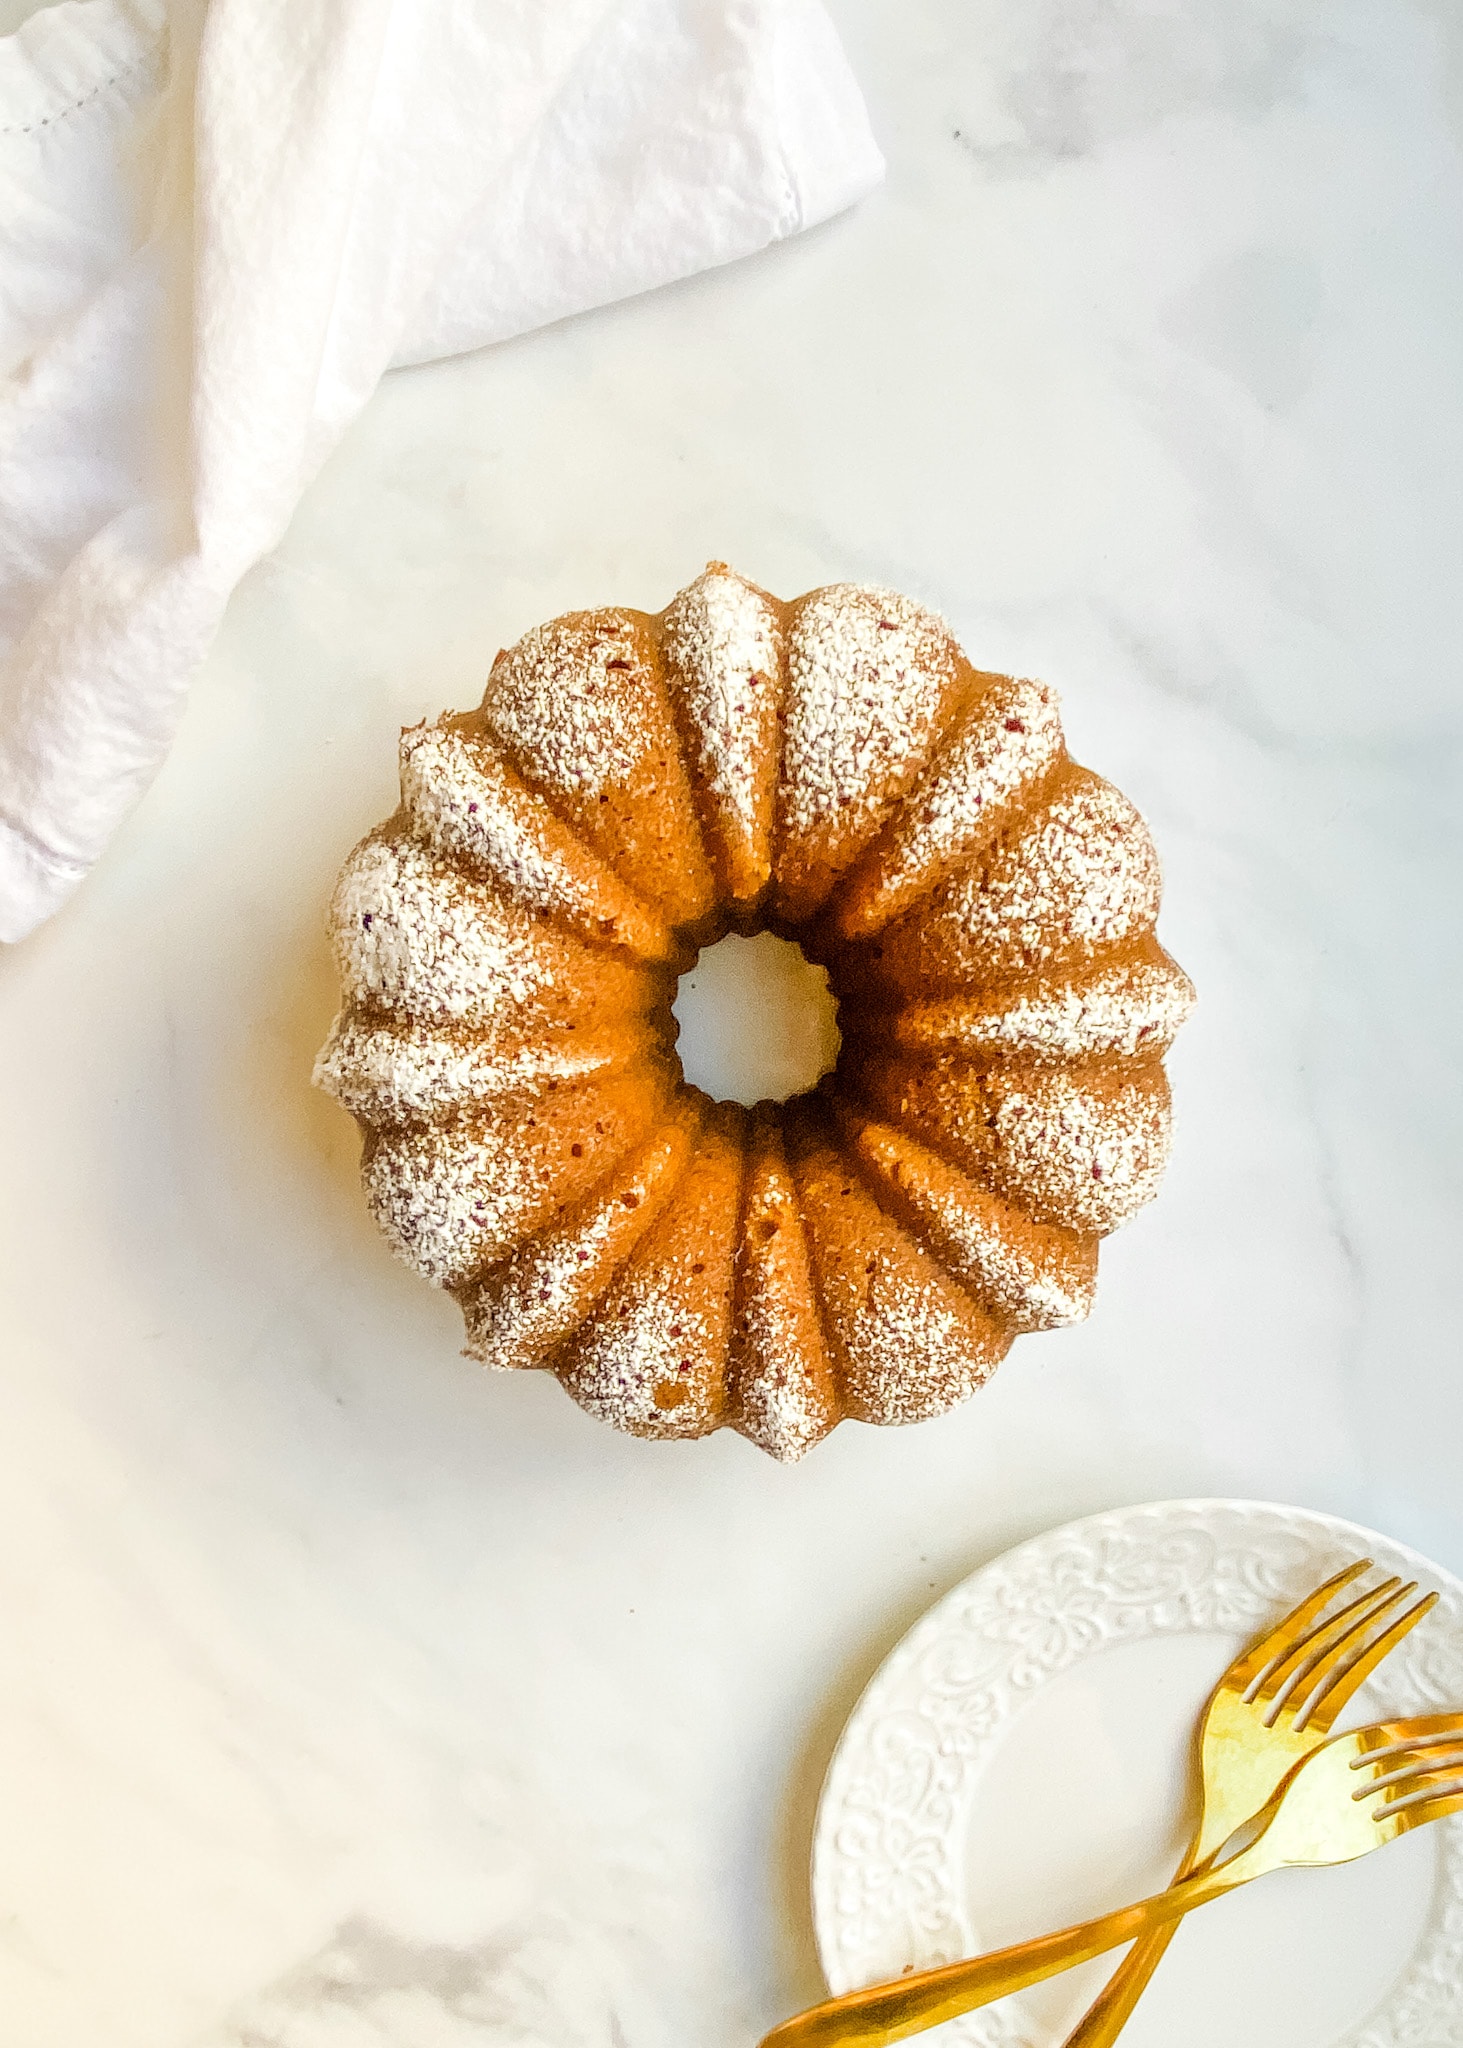 A whole gluten-free pumpkin bundt cake with a dusting of powdered sugar.